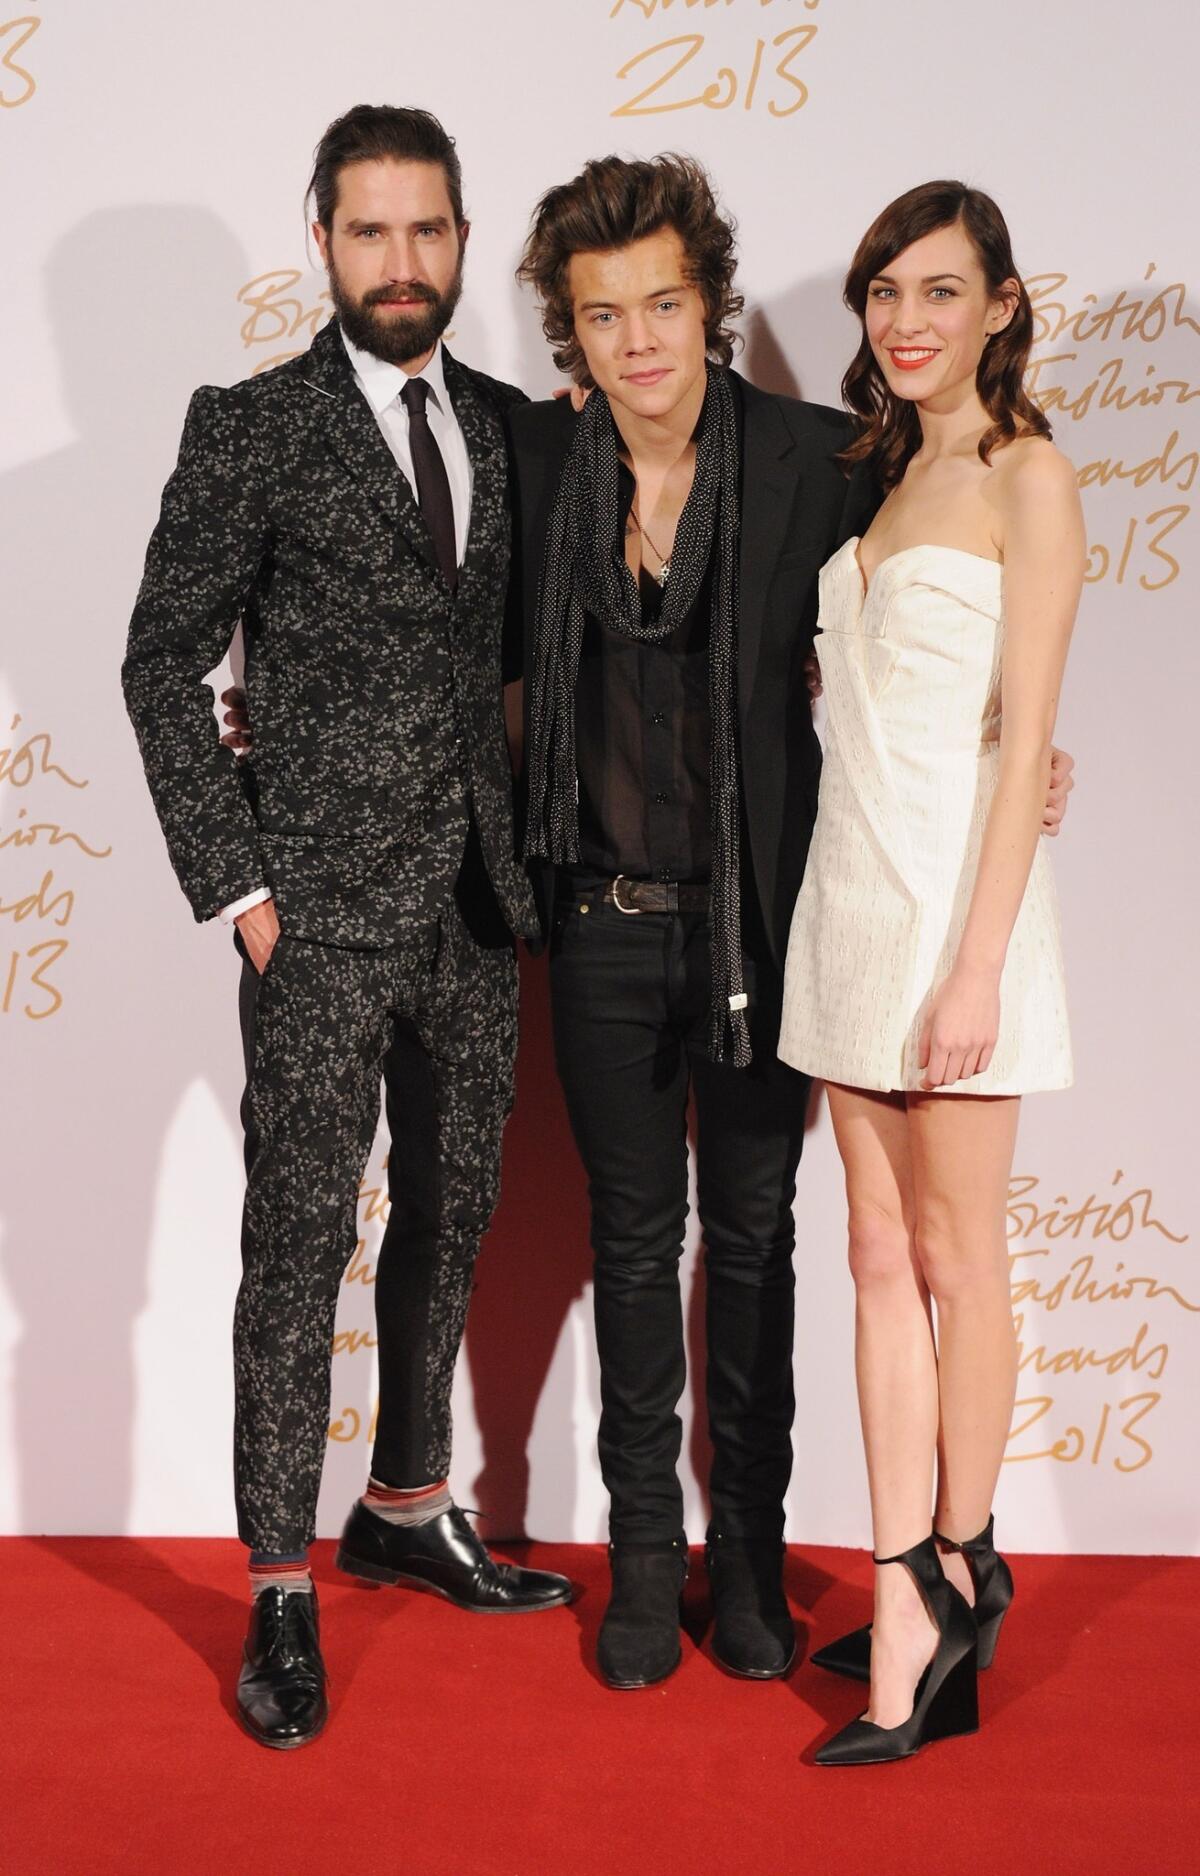 Jack Guinness, left, Harry Styles and Alexa Chung at the British Fashion Awards on Monday. Styles was recipient of the public-voted British Style Award. Guinness and Chung presented it to him.